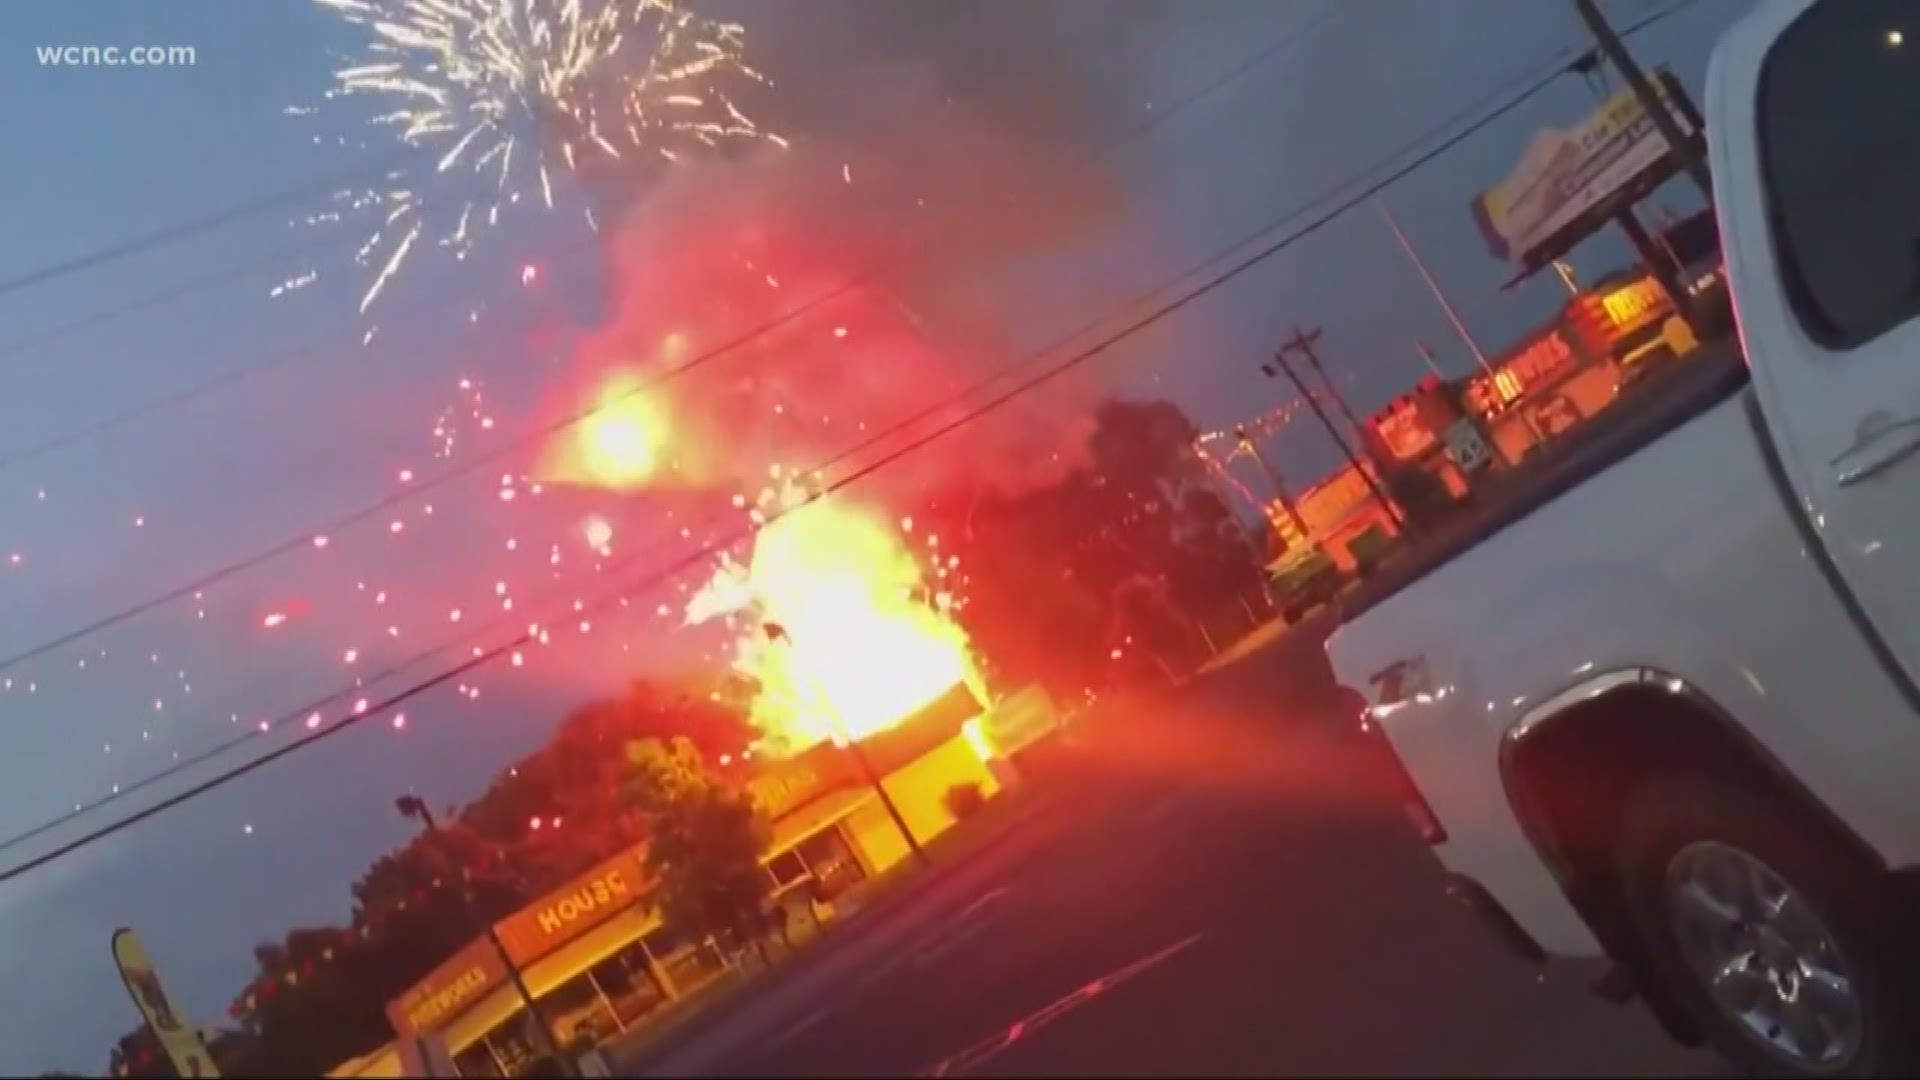 A container holding hundreds of fireworks burst into flames early this morning at Davey Jones Fireworks off U.S. 21.